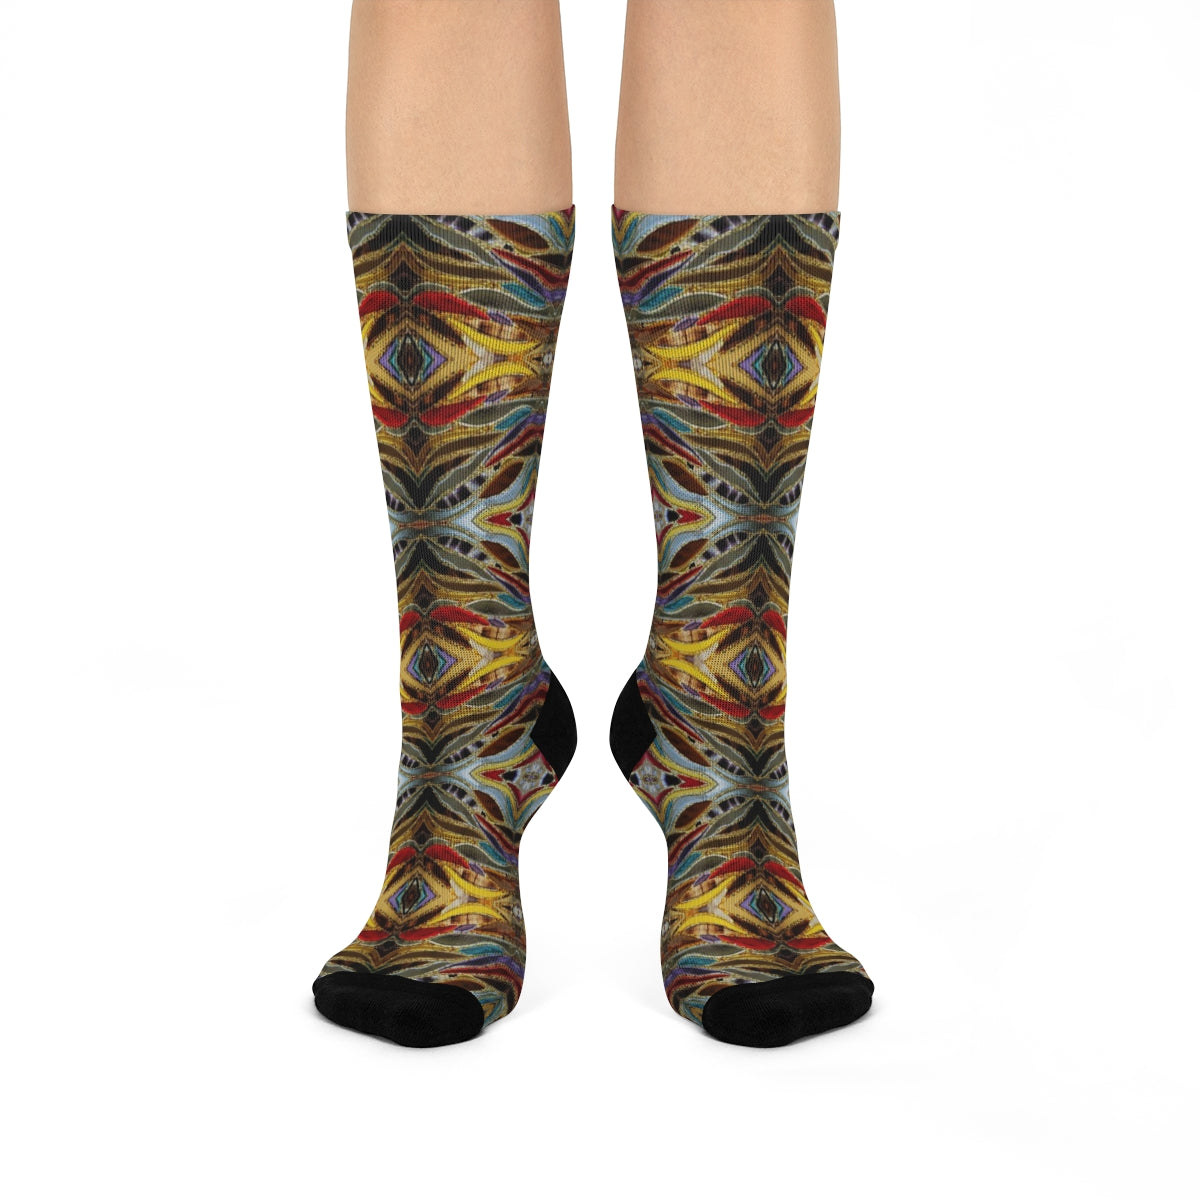 dress socks with a gold silver red and brown crazy fun print